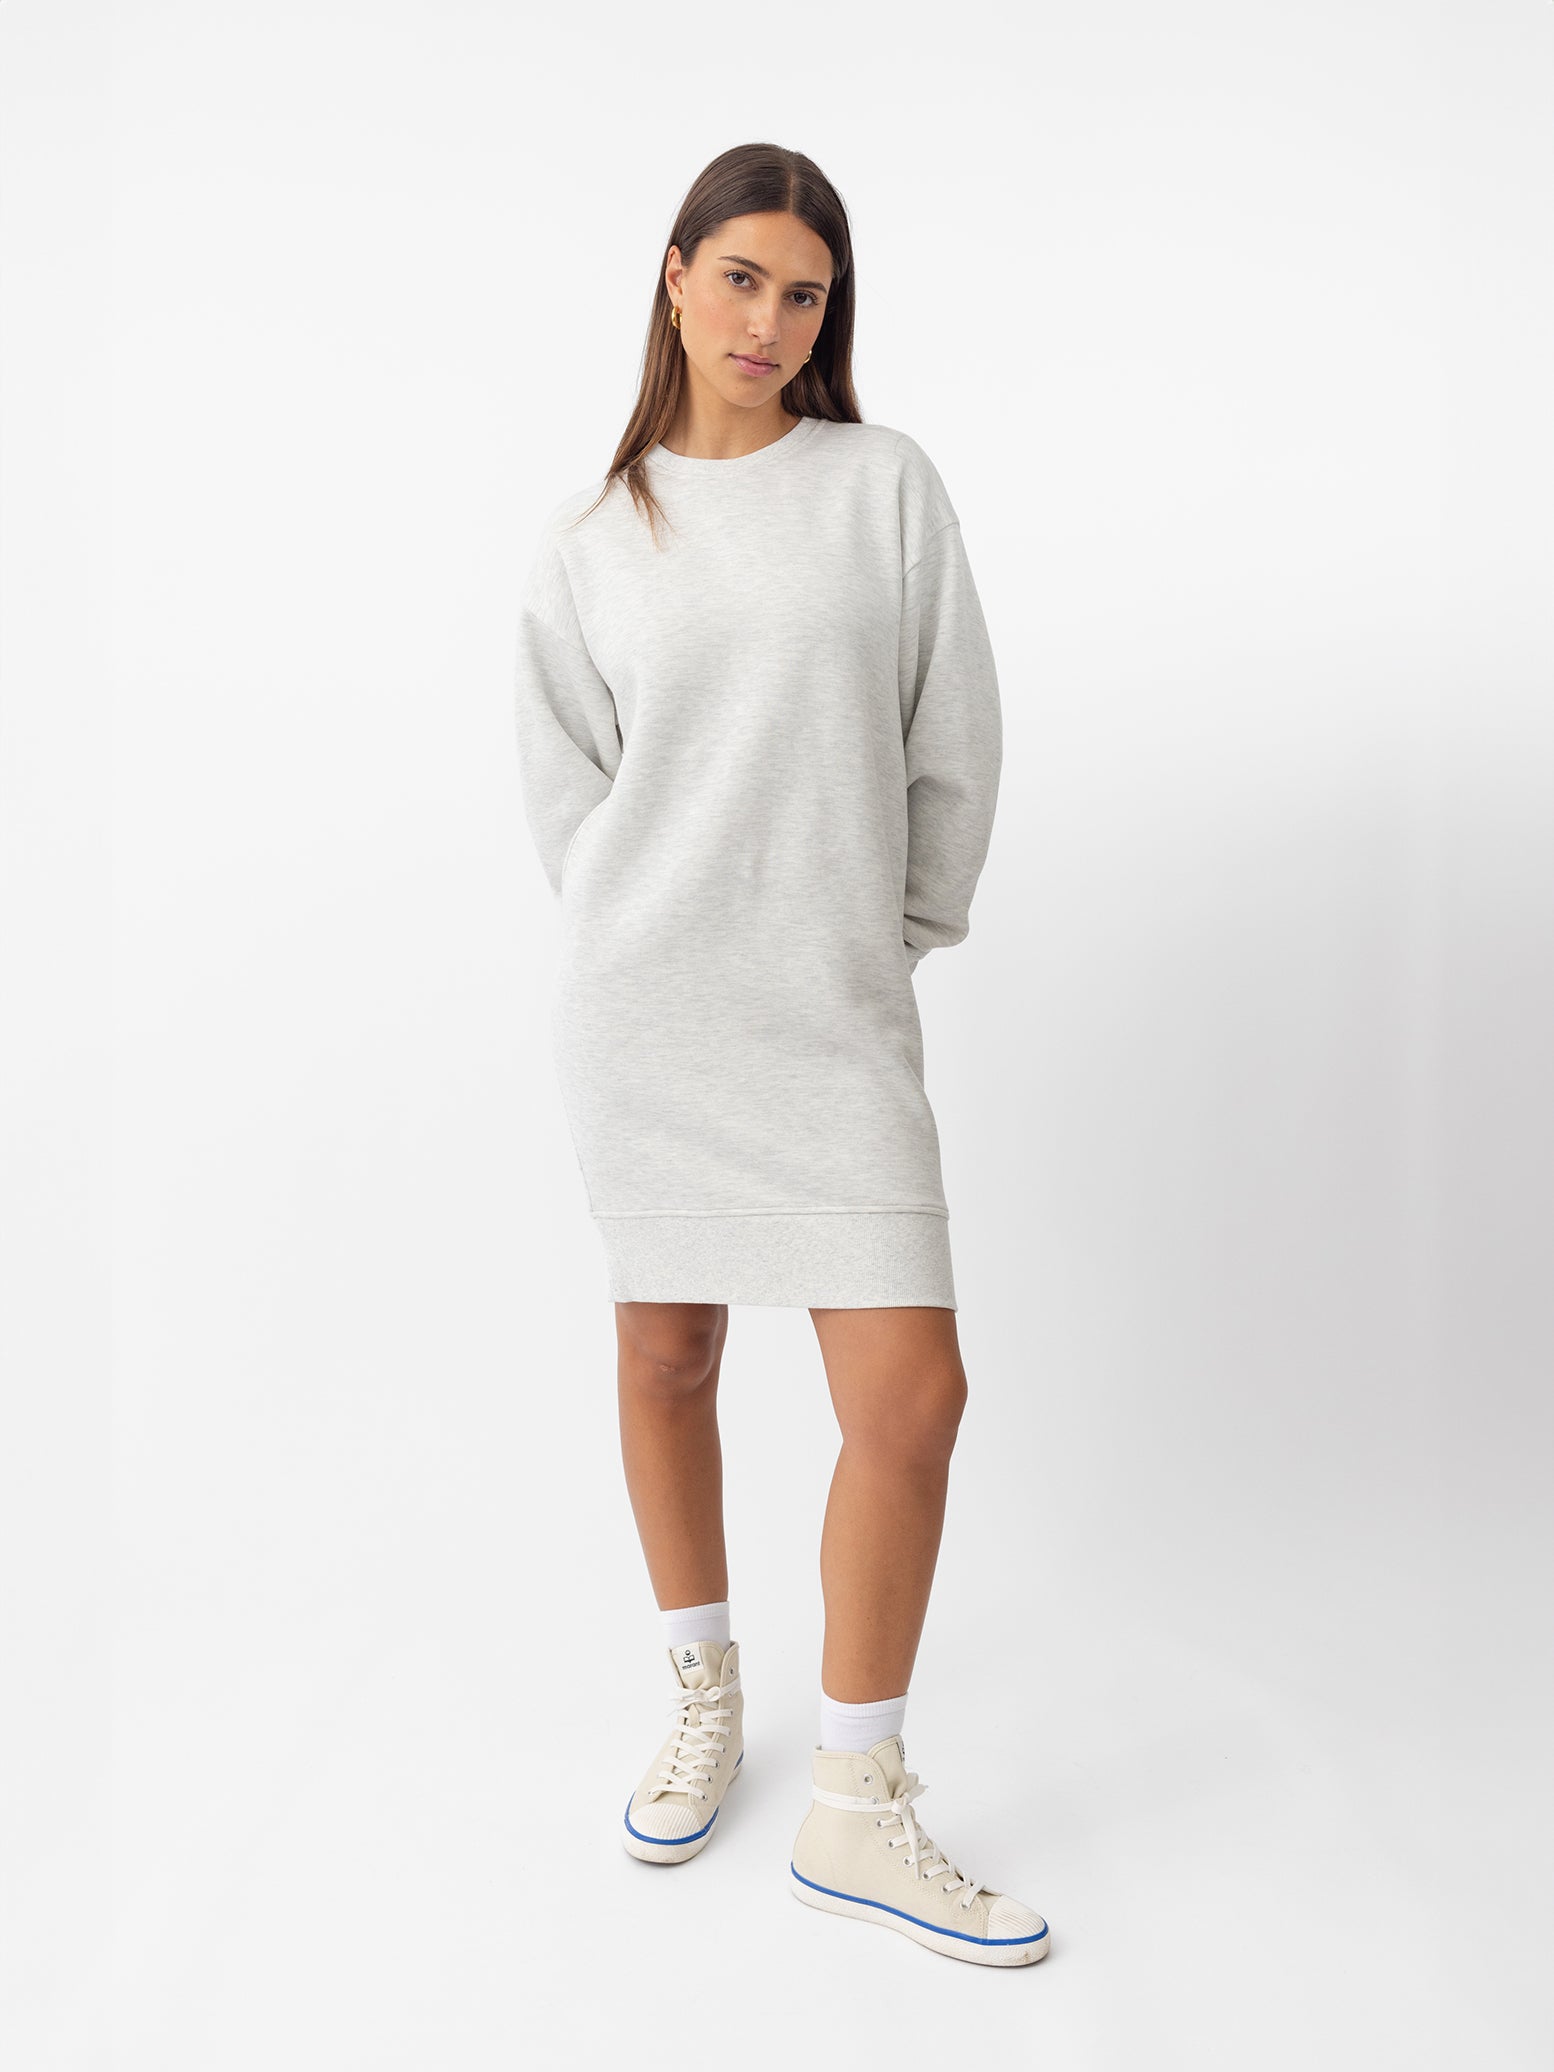 Woman wearing Heather Grey CityScape Crewneck Dress with white background |Color: Heather Grey